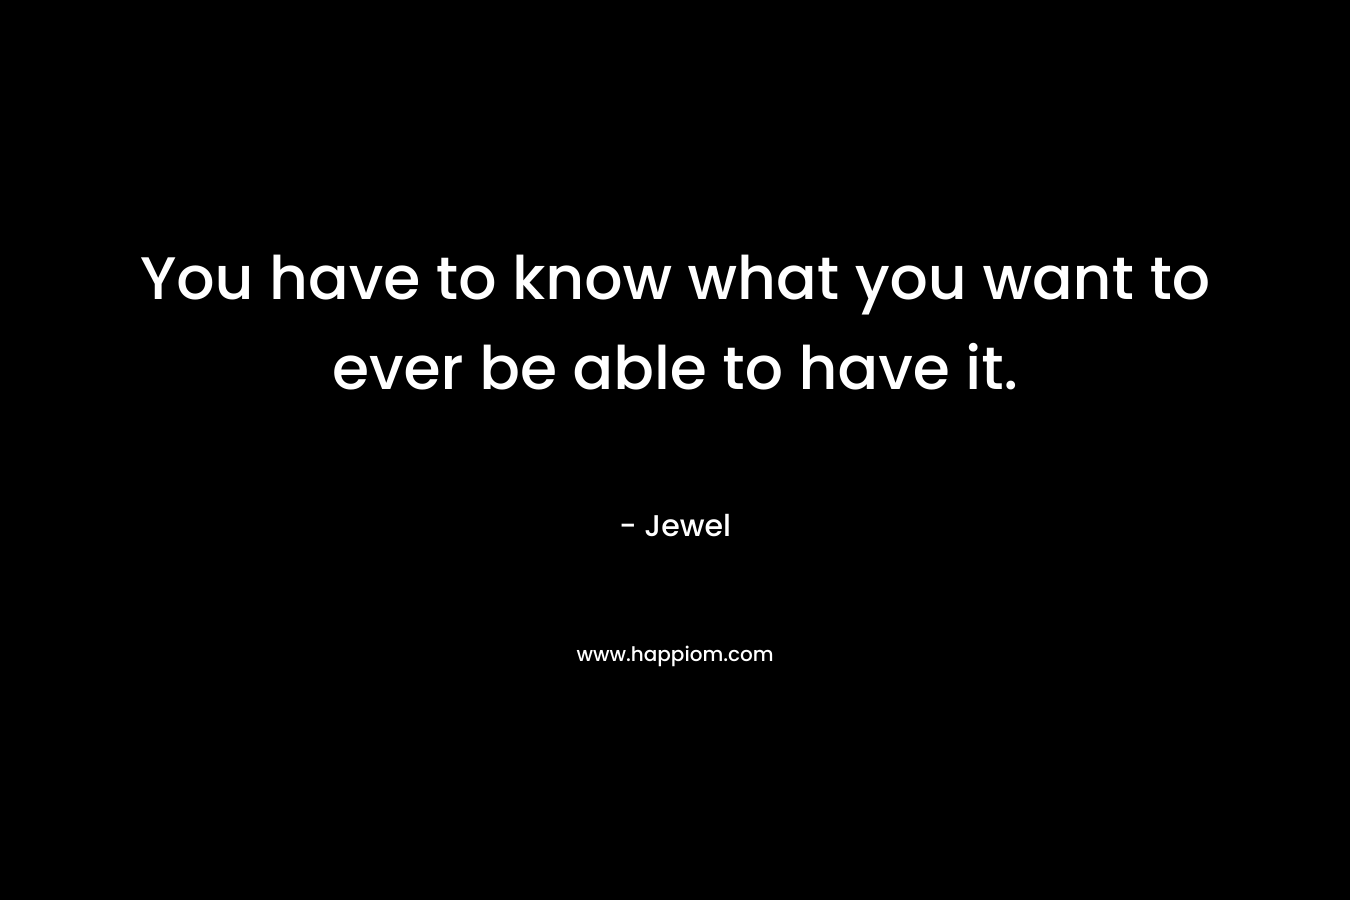 You have to know what you want to ever be able to have it. – Jewel